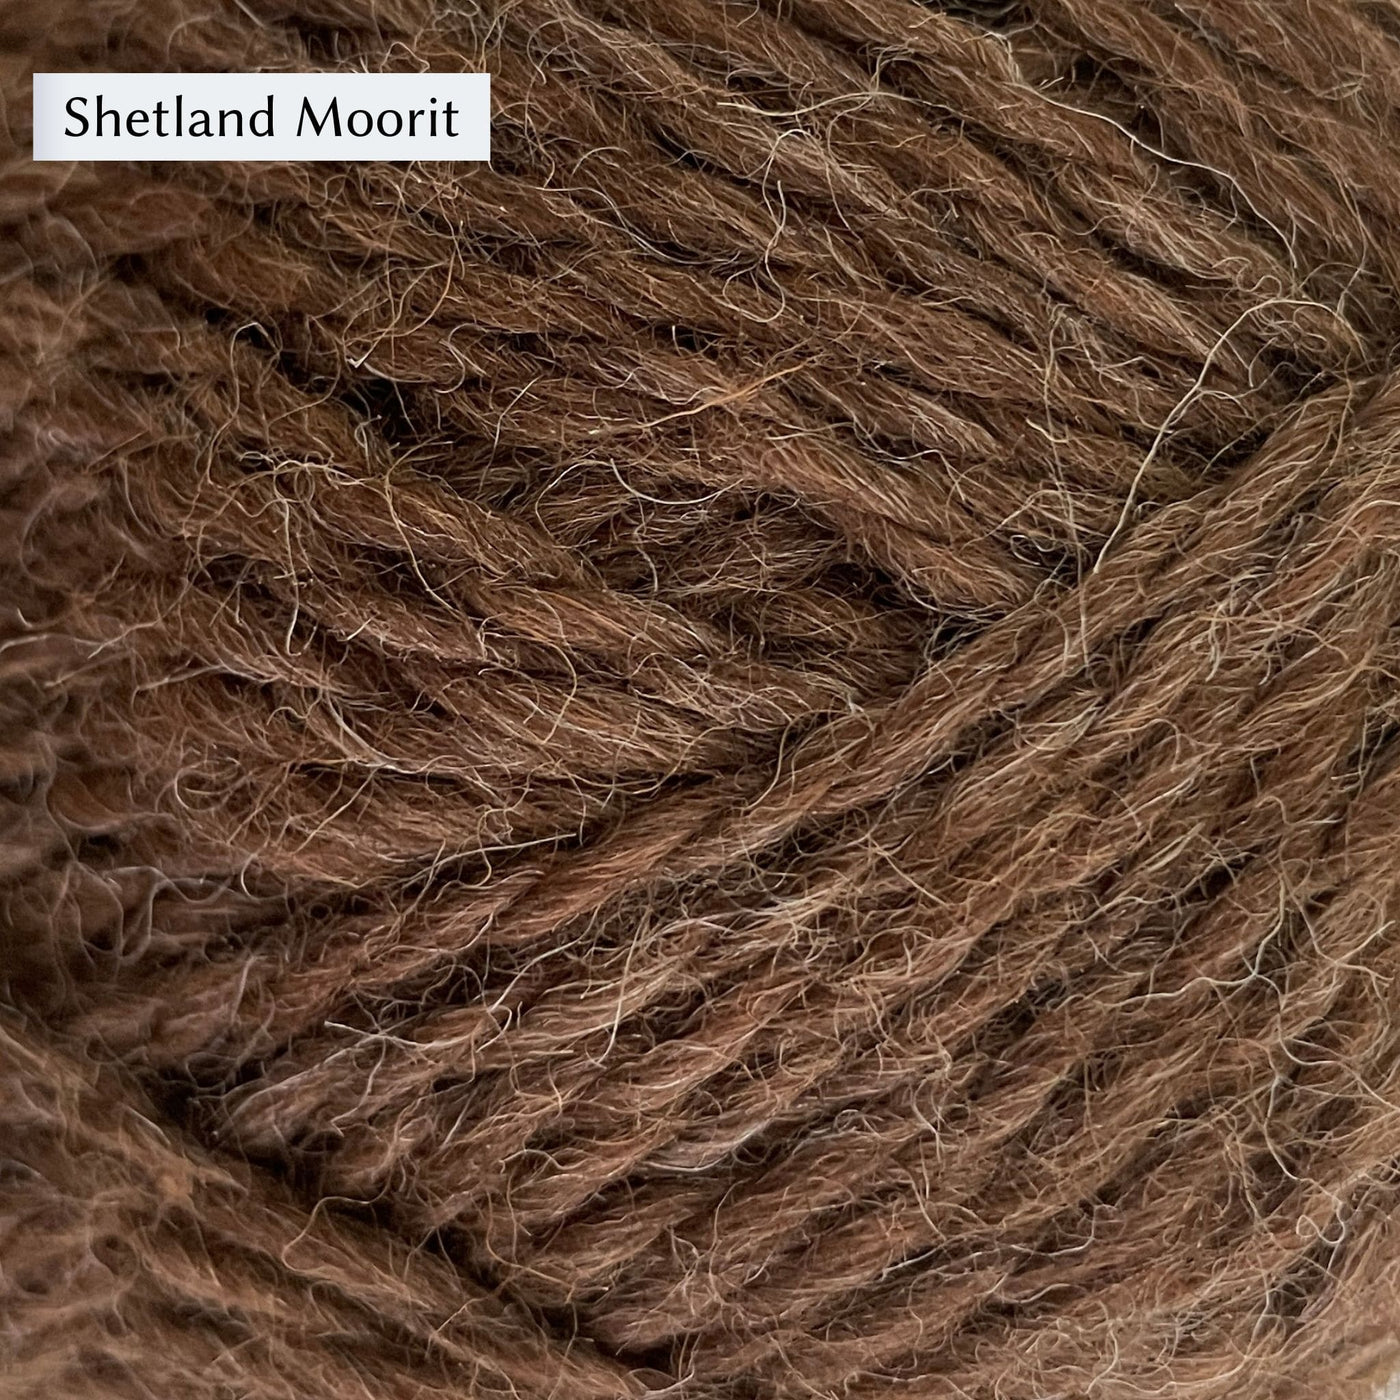 Jamieson & Smith Aran Worsted Yarn close up photo of Shetland Moorit Colorway which is a warm brown color.